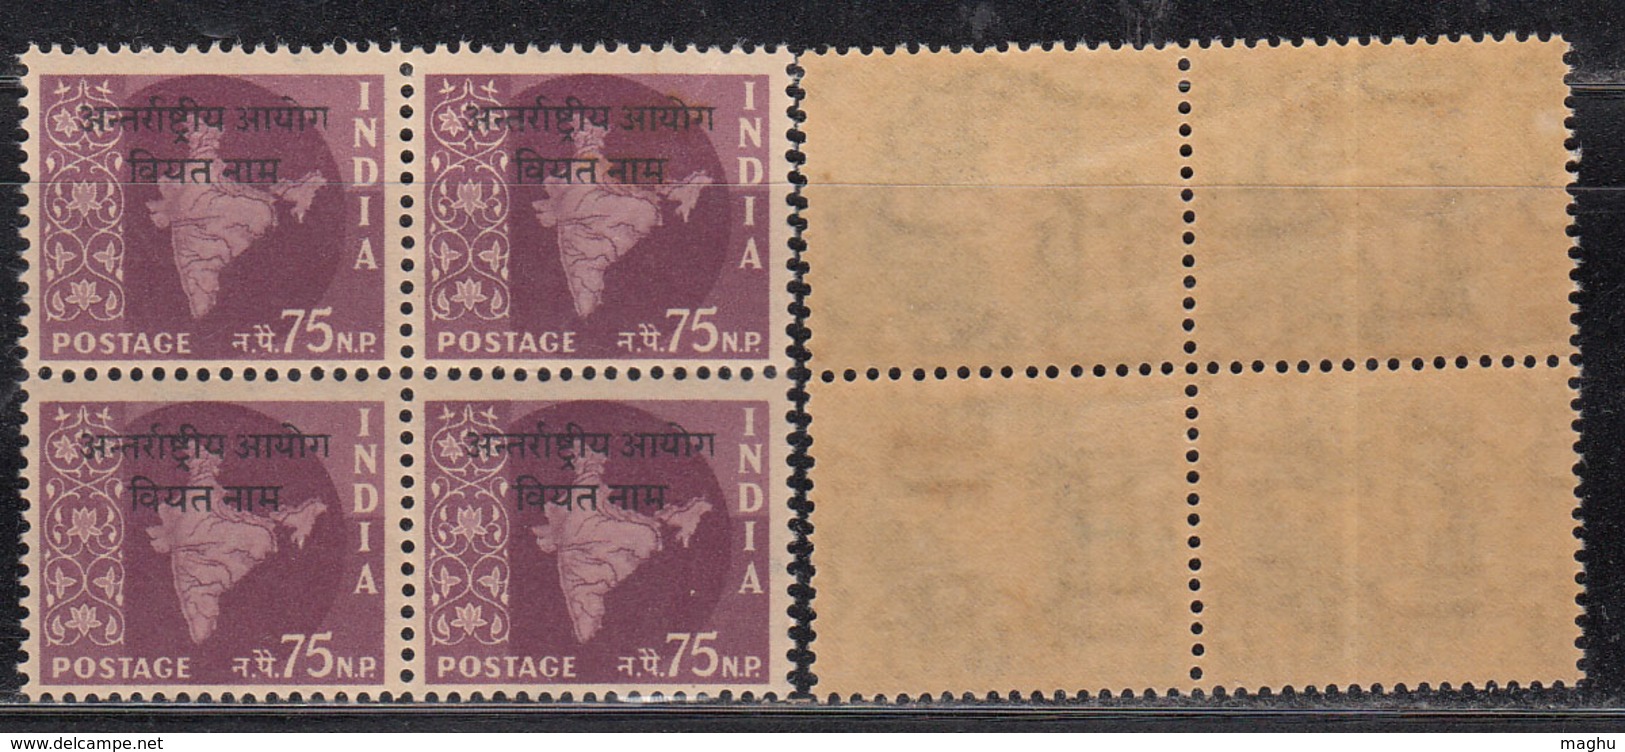 Block Of 4, 75np Ovpt Vietnam On Map Series,  India MNH 1962, Ashokan Watermark, - Franchise Militaire